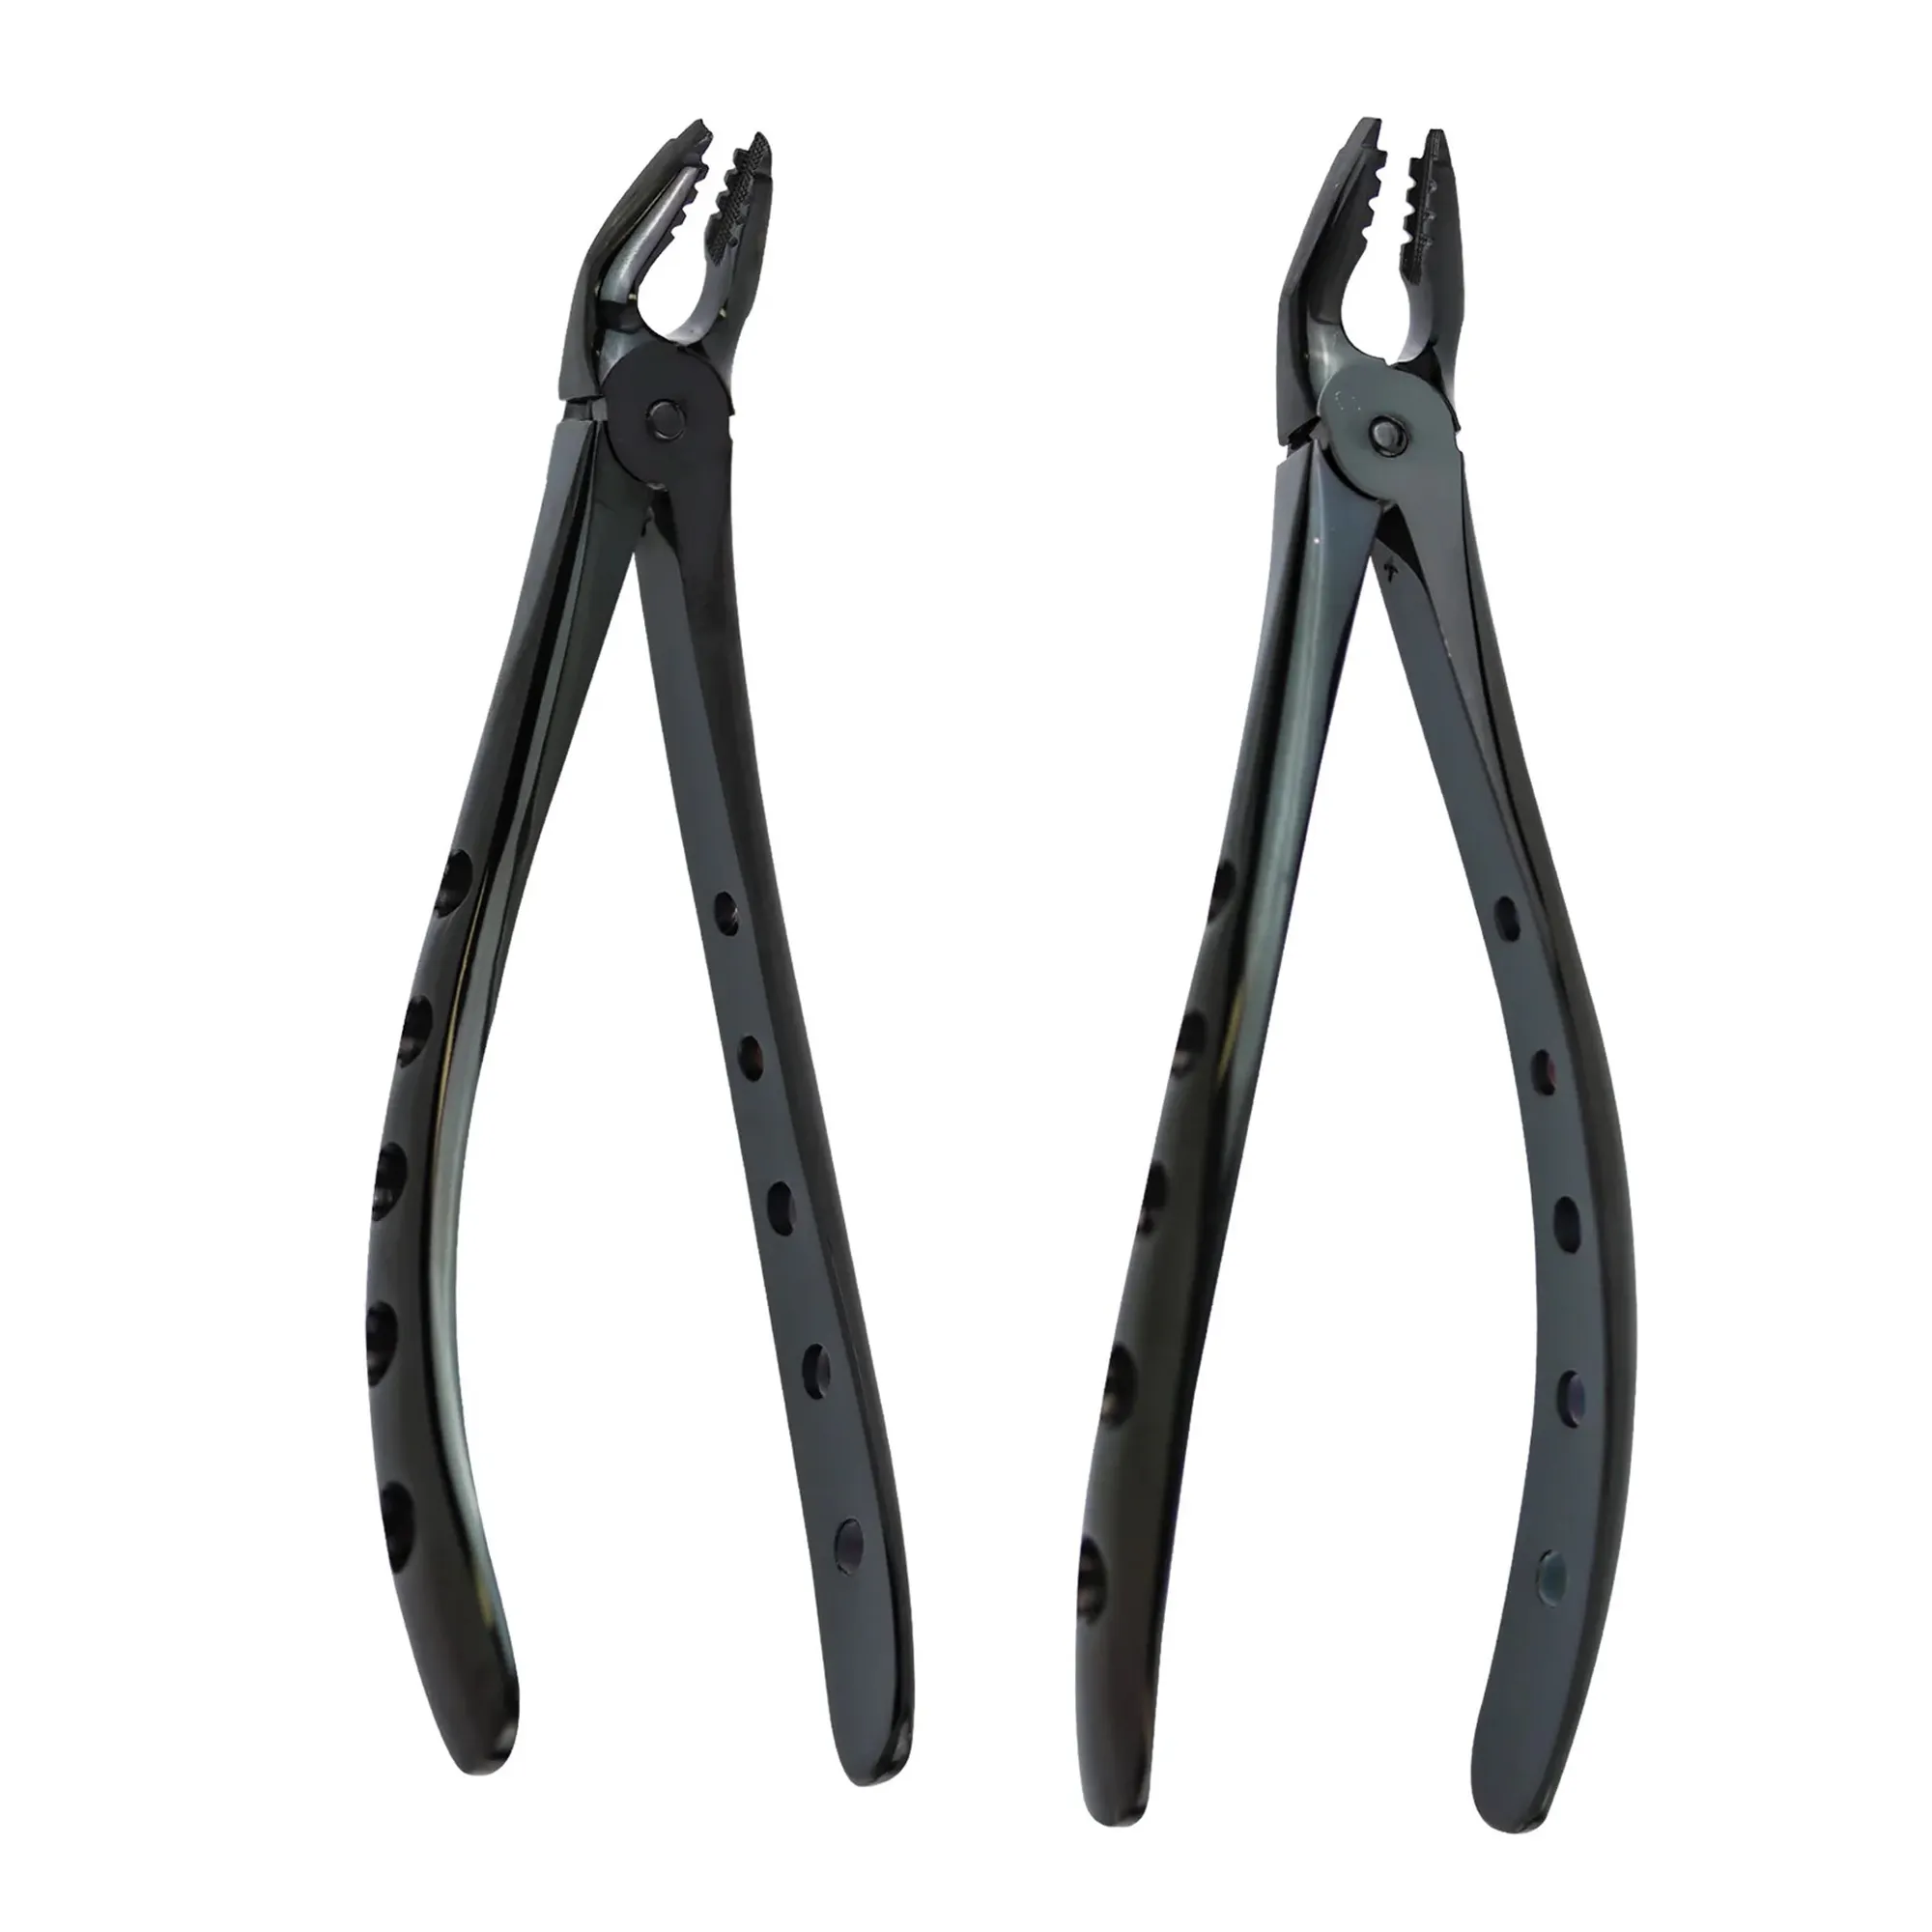 2 Black Color Hot Dental Tooth Root Extraction Forceps Best Luxurious Dental Tooth Left Right Side Forceps